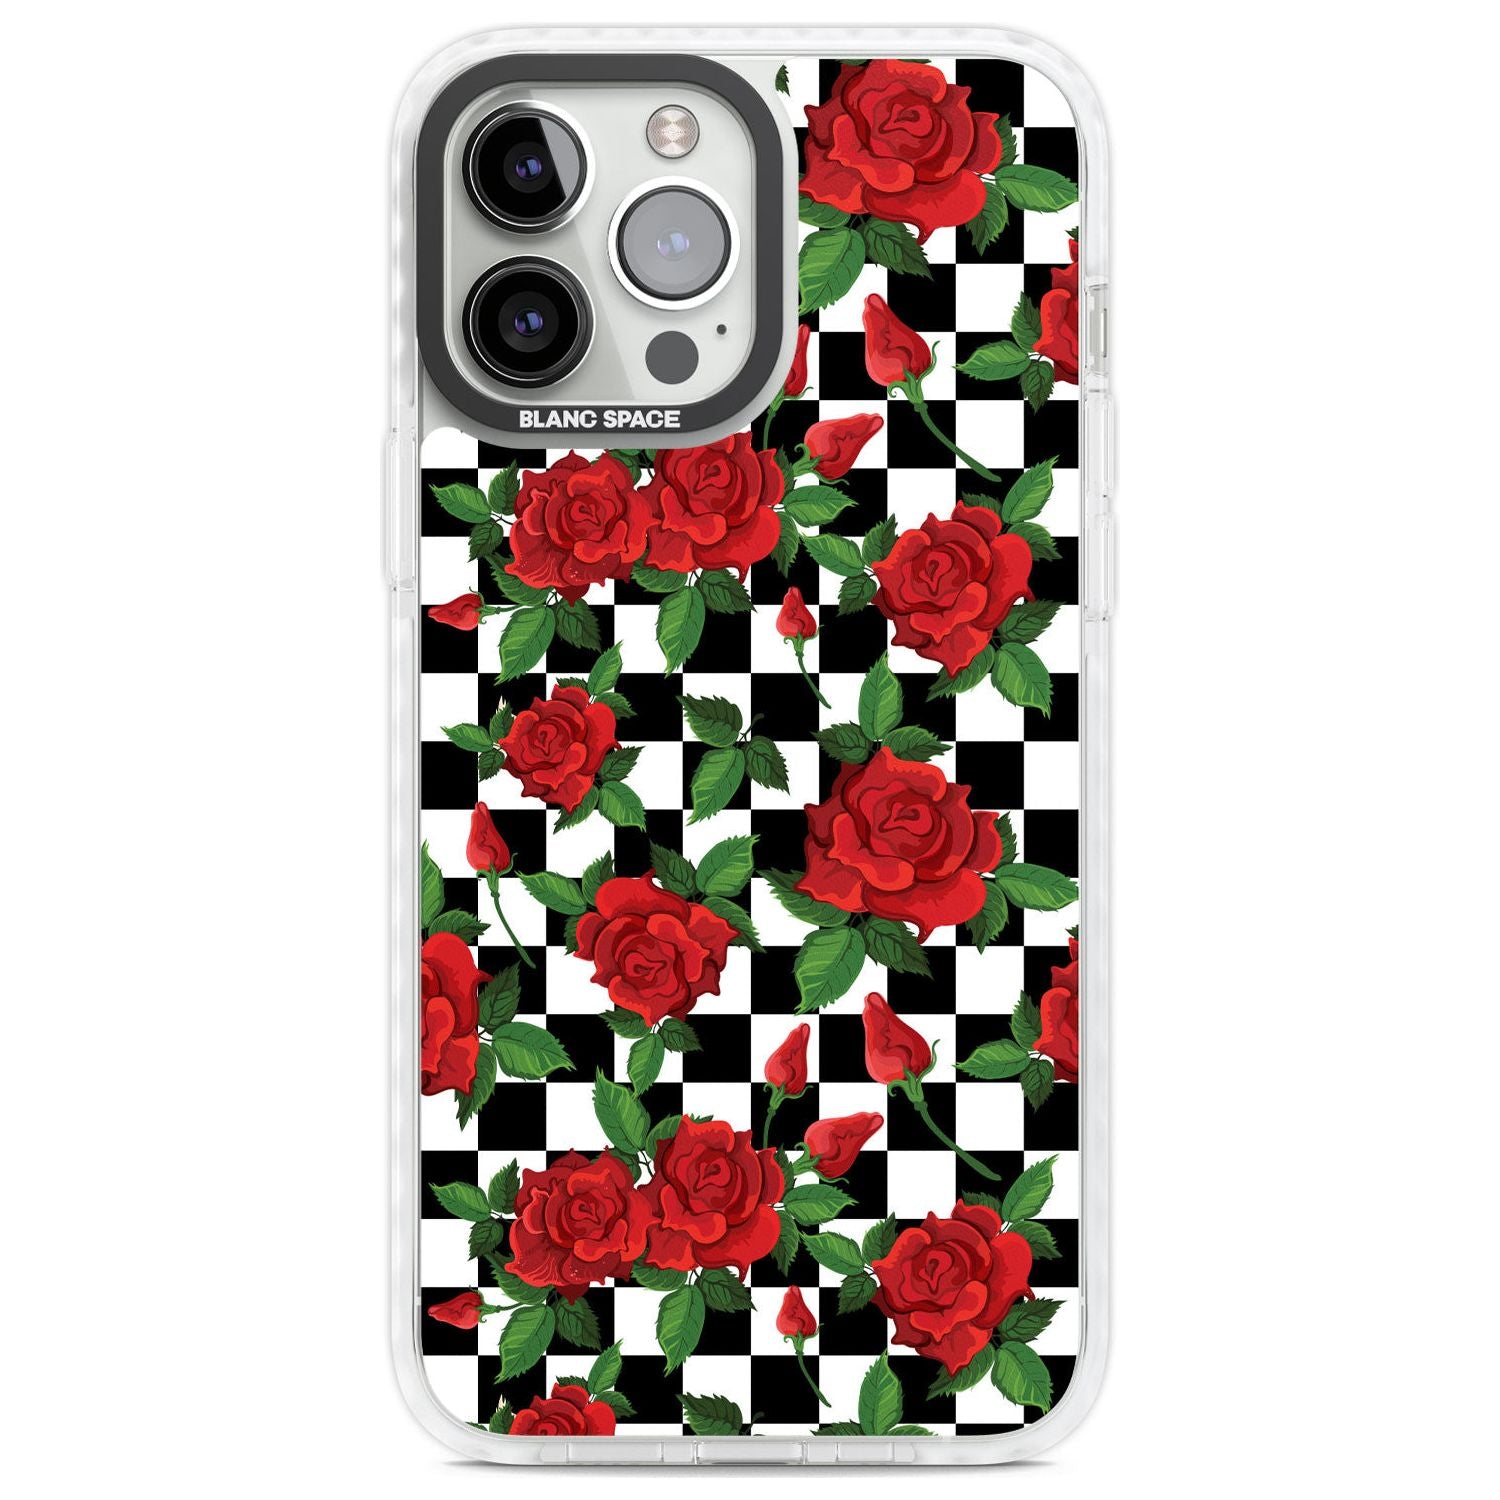 Checkered Pattern & Red Roses Phone Case iPhone 13 Pro Max / Impact Case,iPhone 14 Pro Max / Impact Case Blanc Space